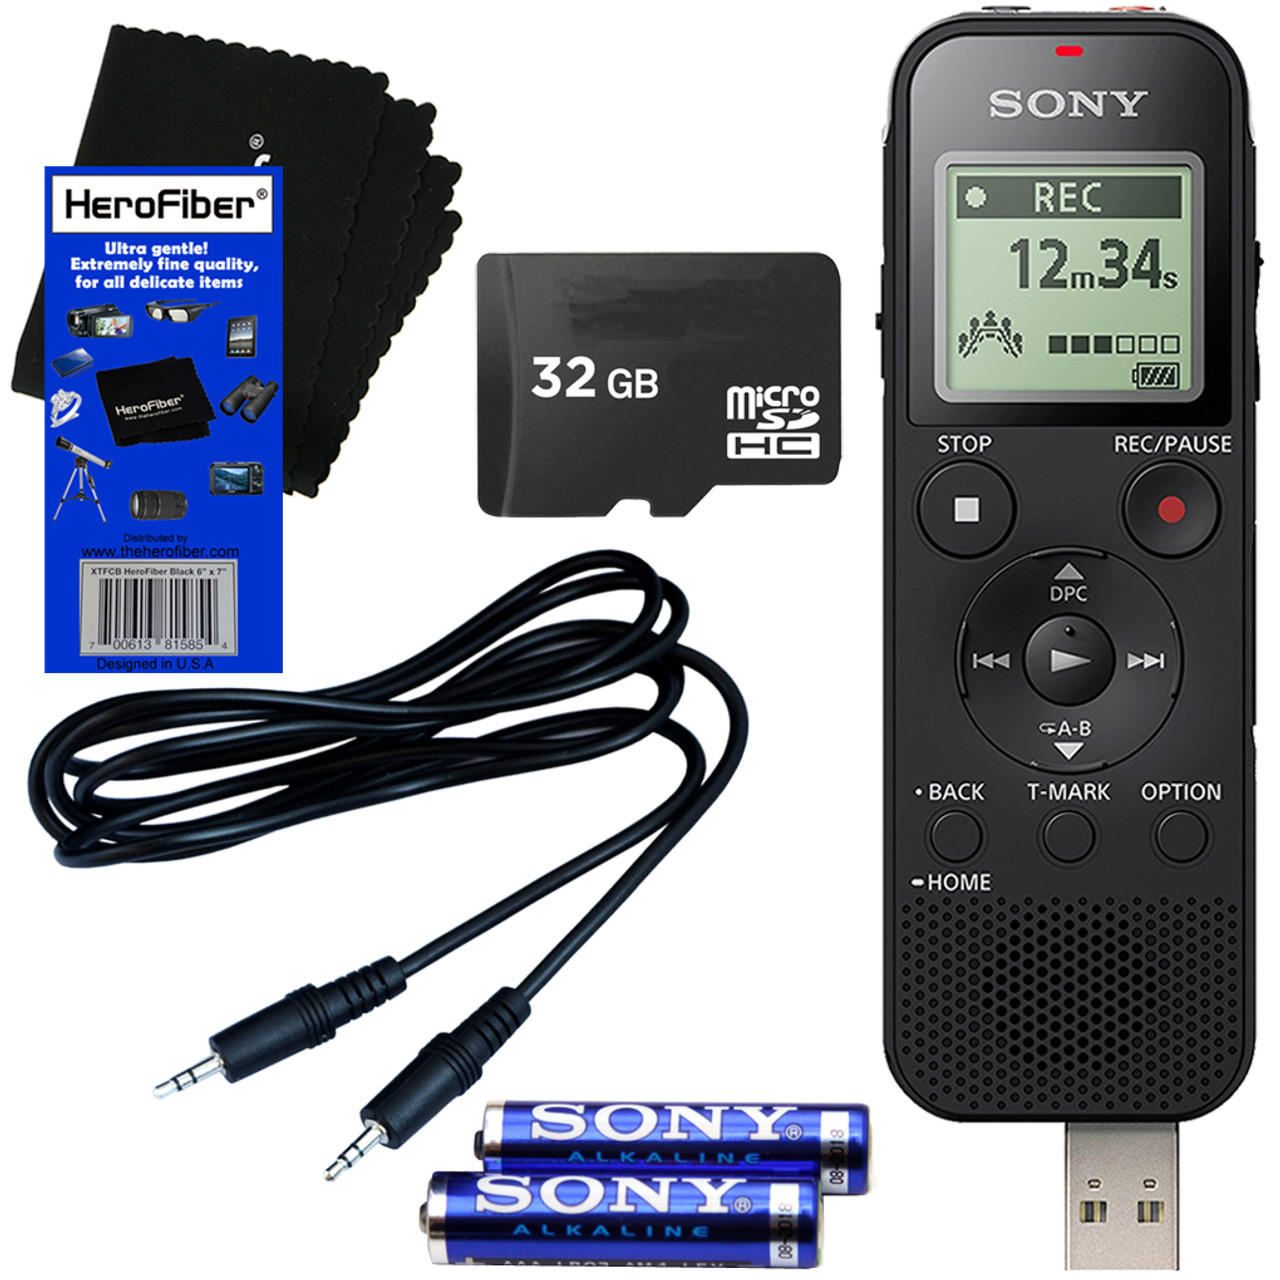 Sony ICD-PX470 Stereo Digital Voice Recorder with with Built-in 4GB & Direct USB + 32GB Micro SDHC Memory Card + Cable + AAA Batteries + HeroFiber Ultra Gentle Cleaning Cloth -